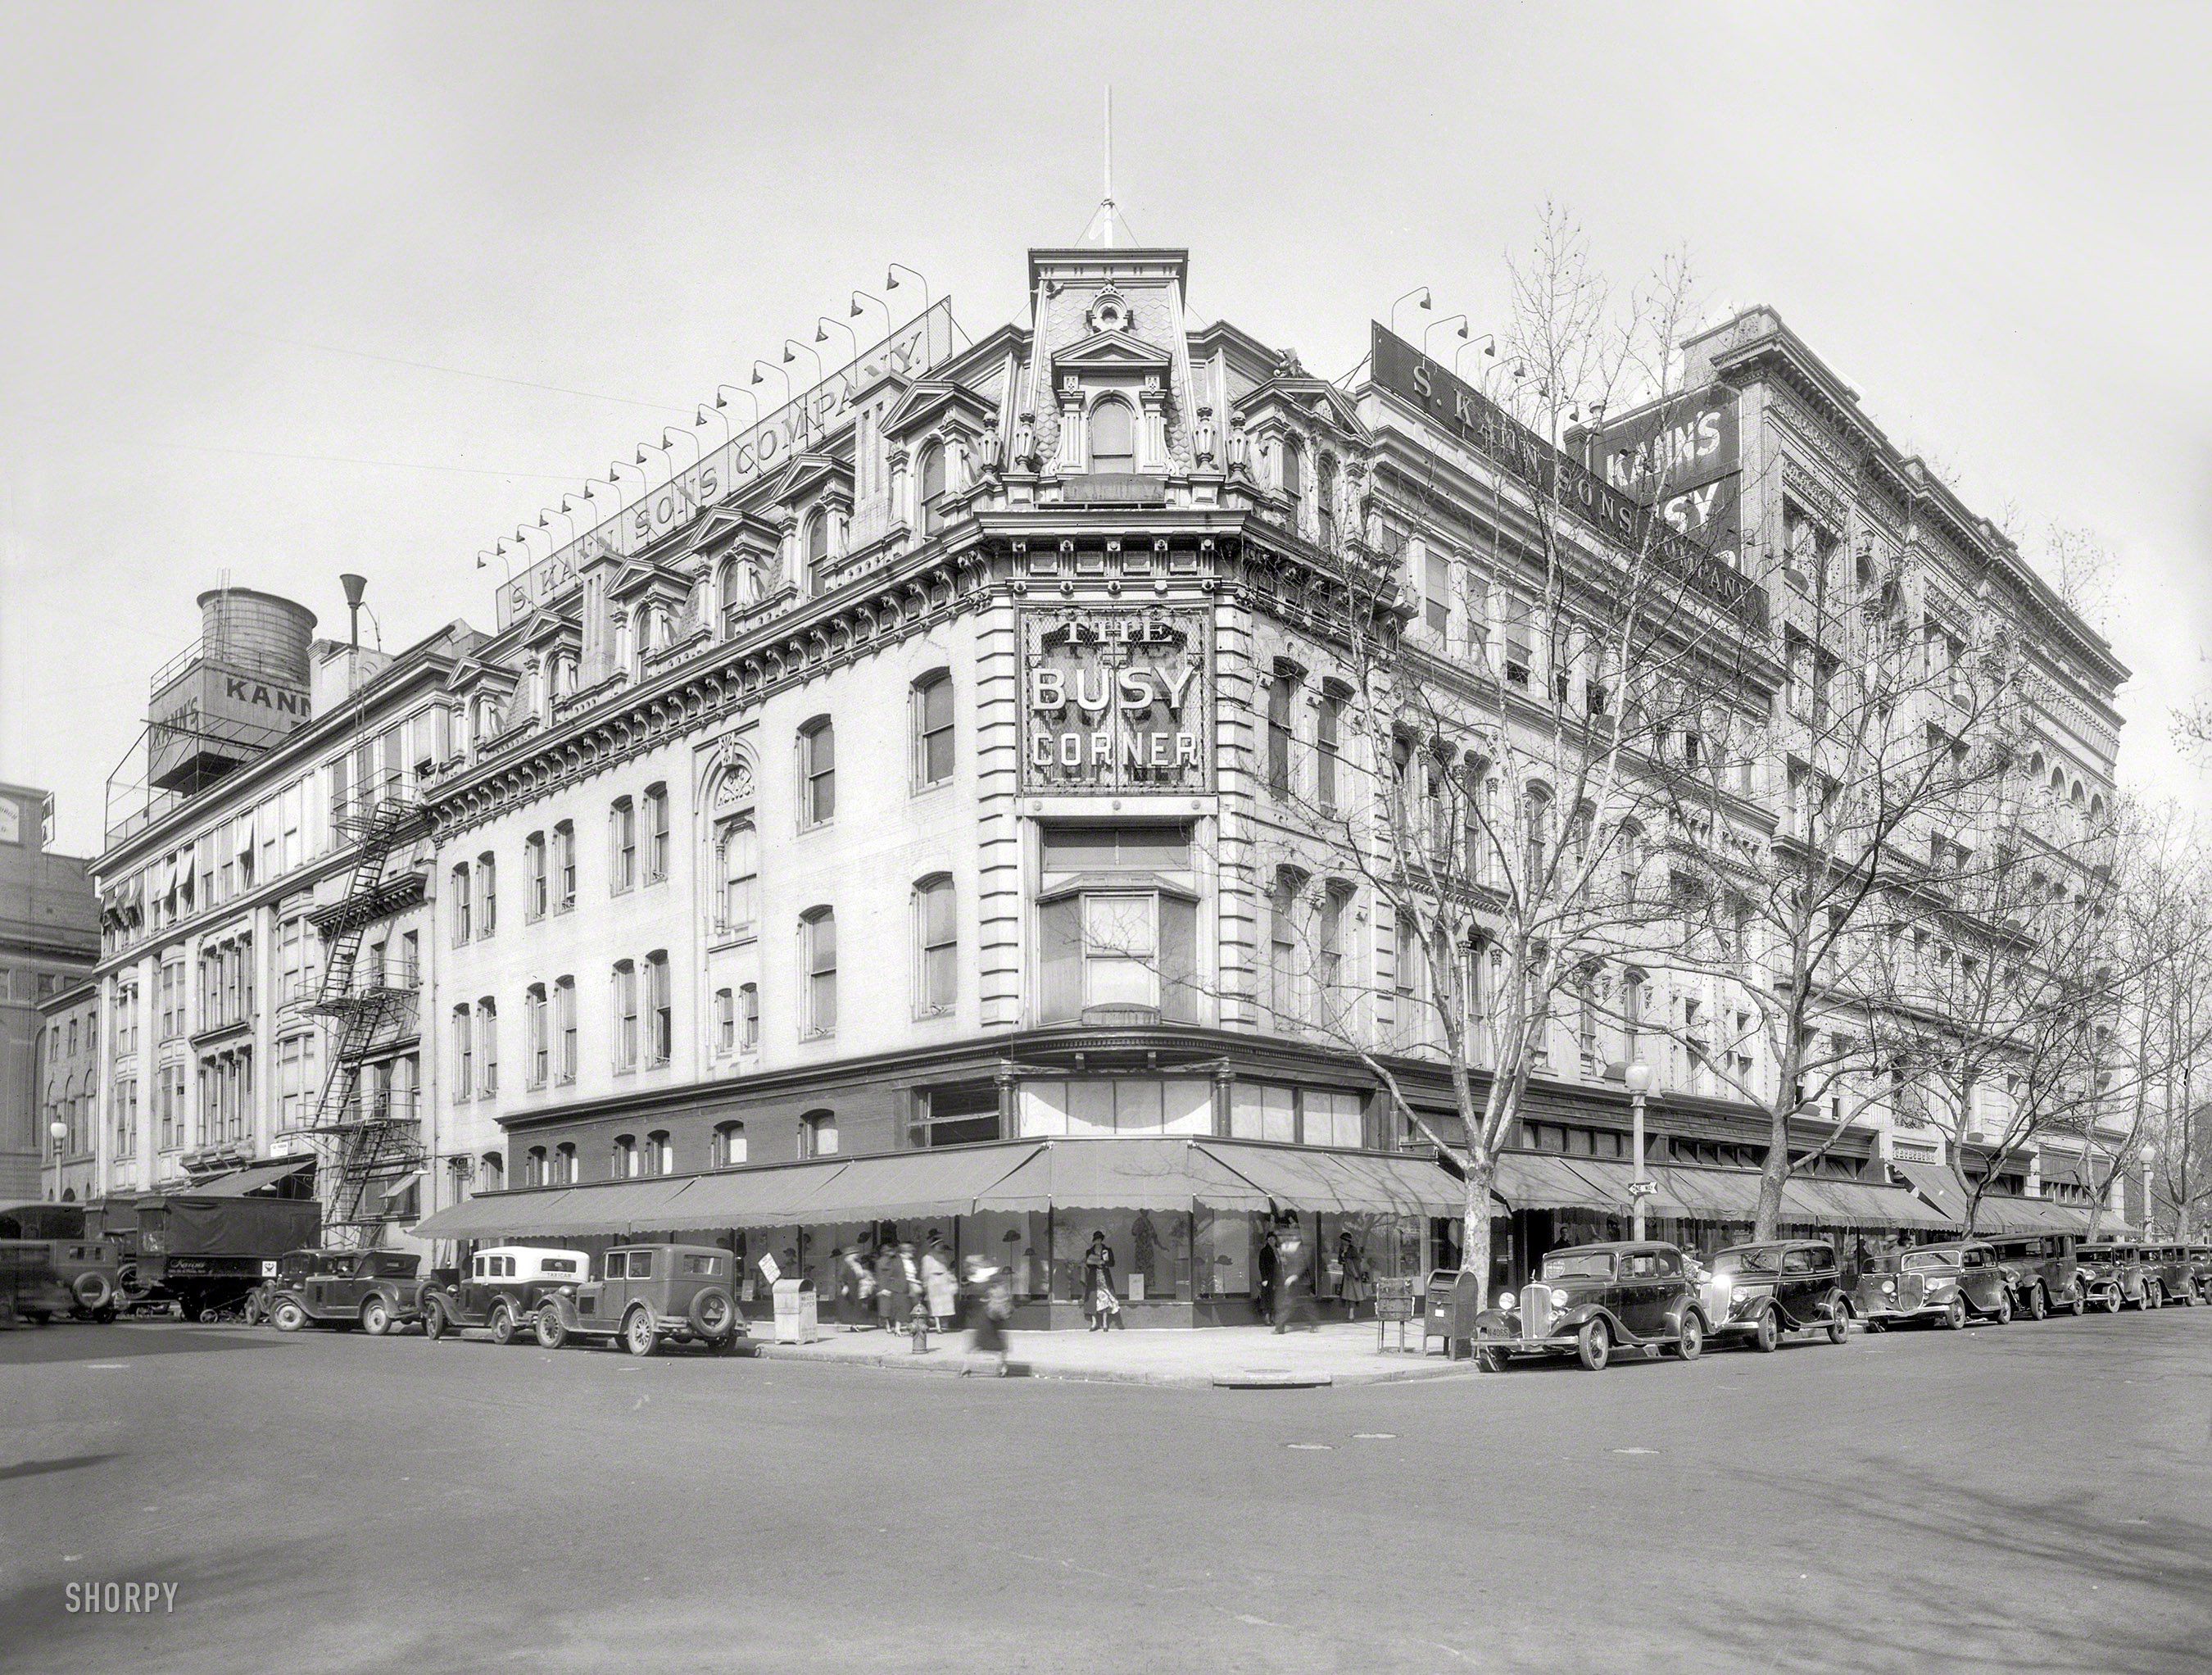 Washington, D.C., circa 1934. "Kann's Department Store." Pennsylvania Avenue at Eighth Street. National Photo Co. Collection glass negative. View full size.